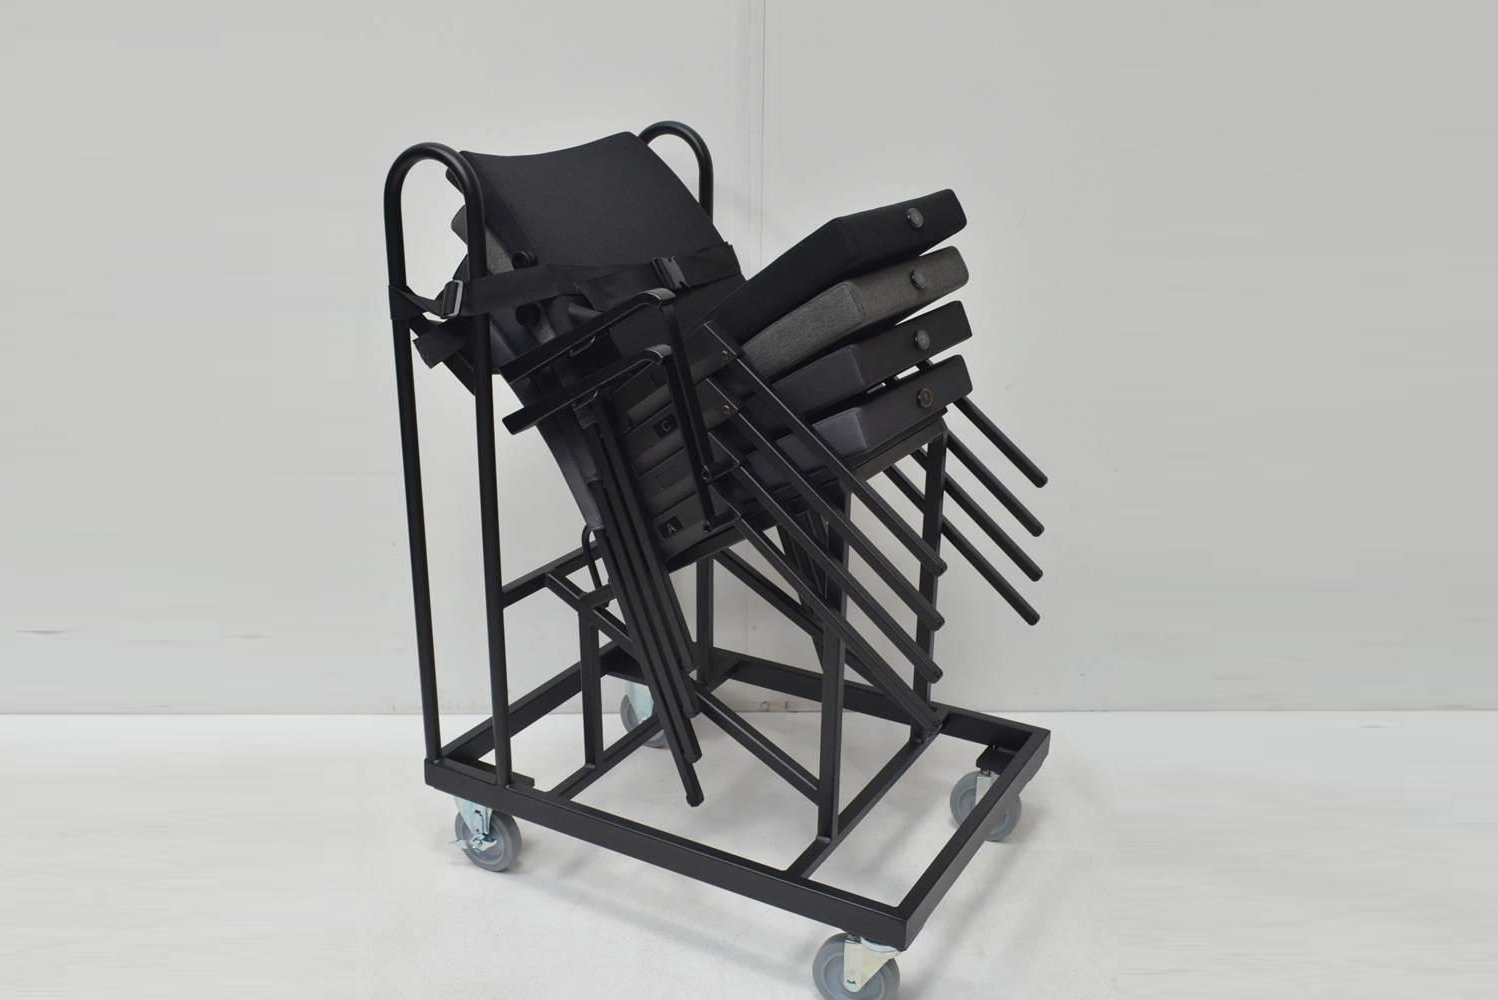 The SERIES Model-K chair is an upholstered theater stacking chair featuring an automatic gravity-return self-lifting seat